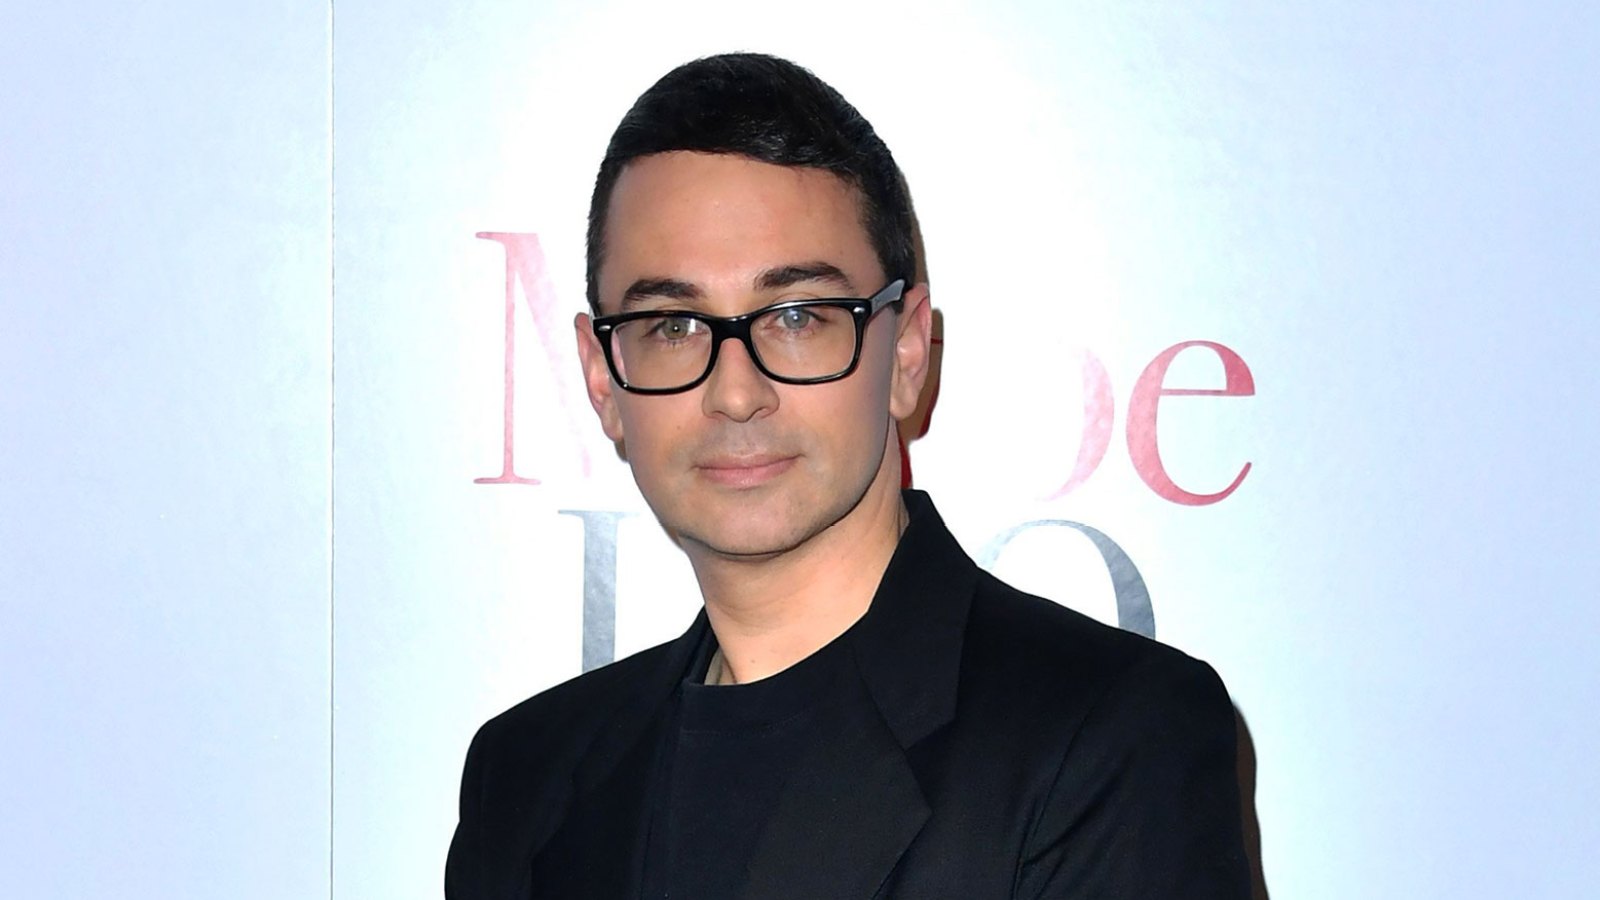 Pipe Bursts in Christian Siriano Showroom, Destroying Gowns Just Days Before the Oscars glasses